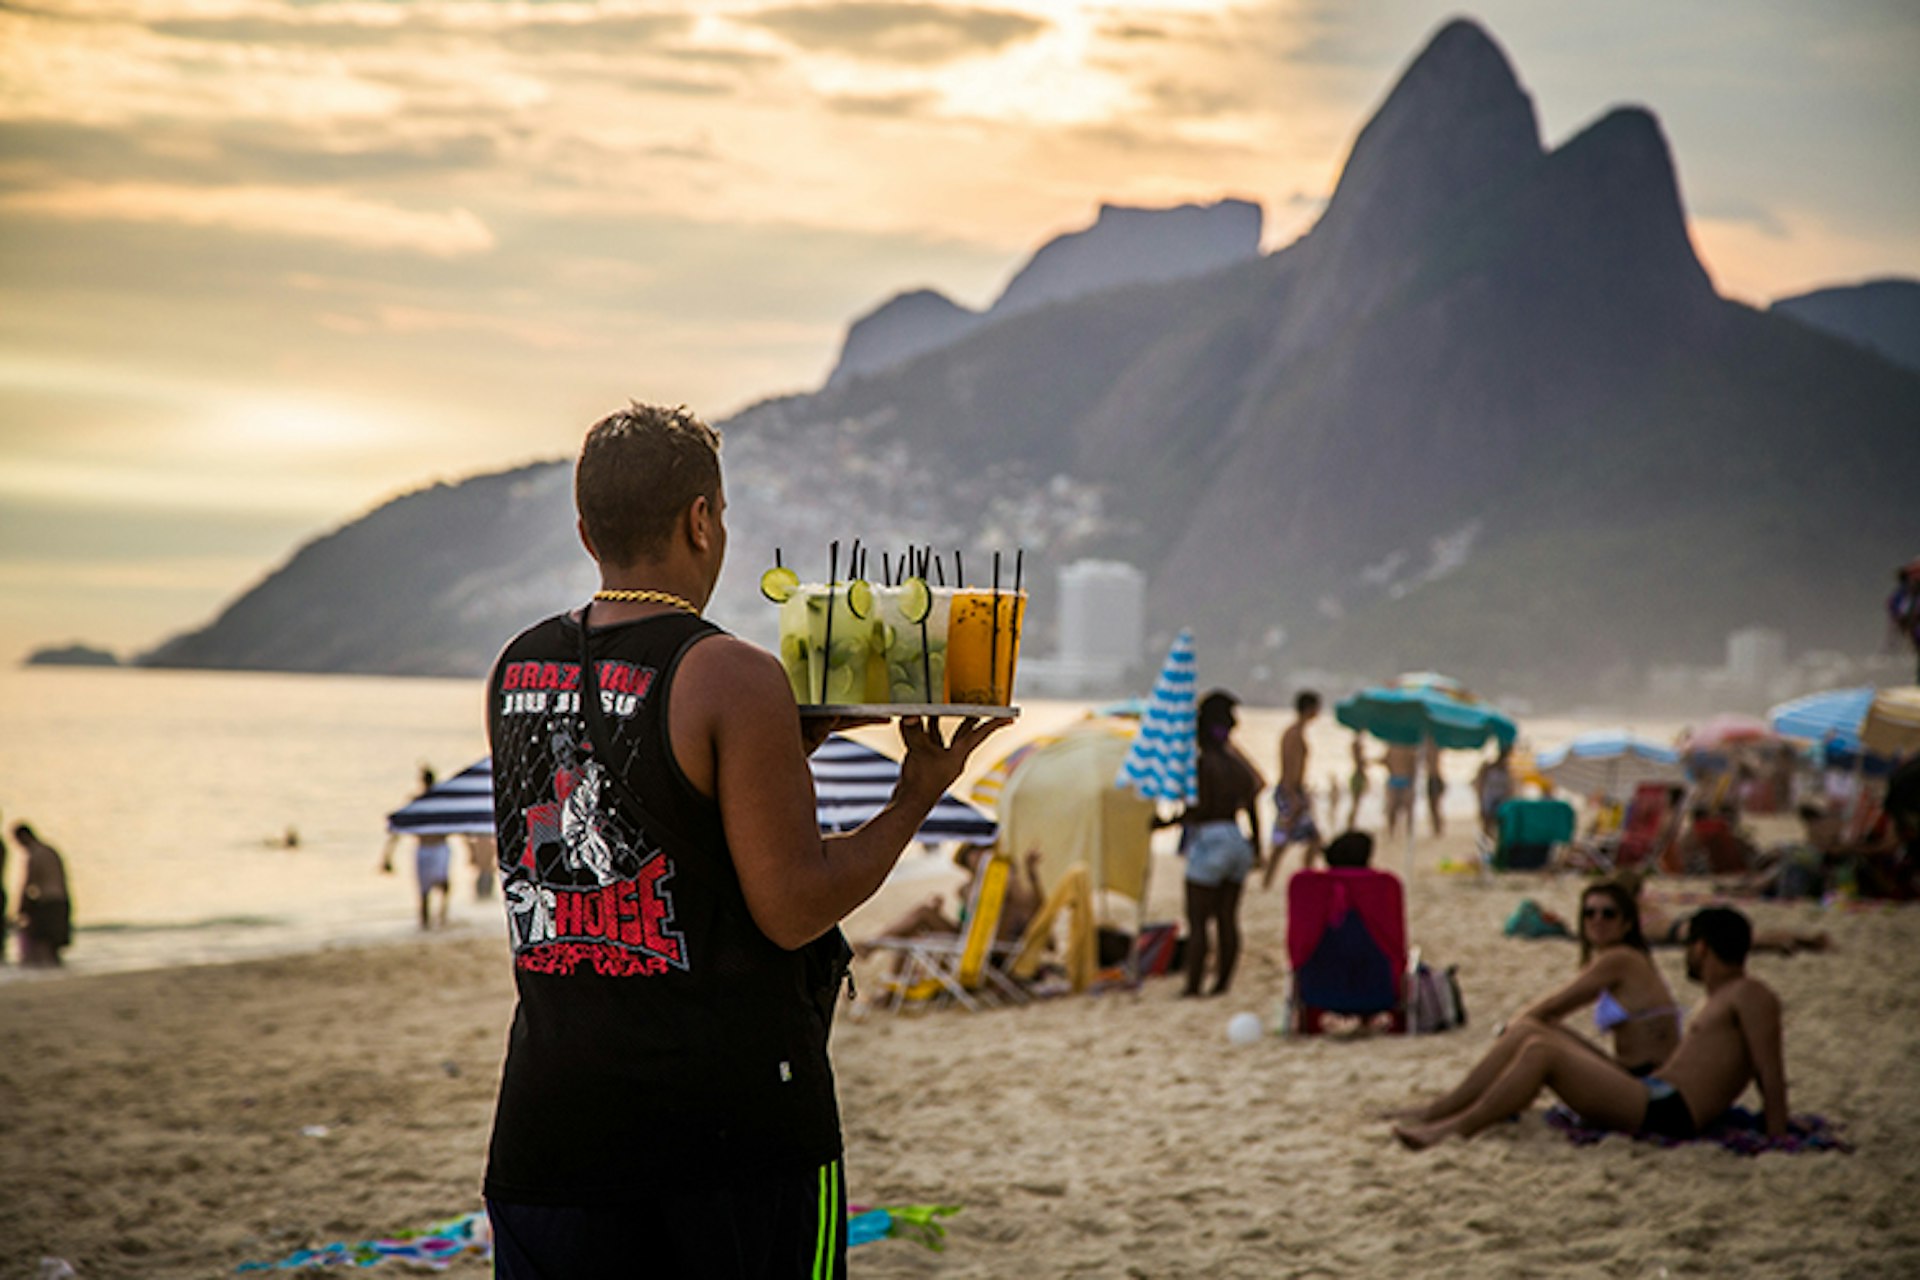 Chill out on Ipanema beach with a refreshing caipirinha. Image by Teresa Geer / Lonely Planet